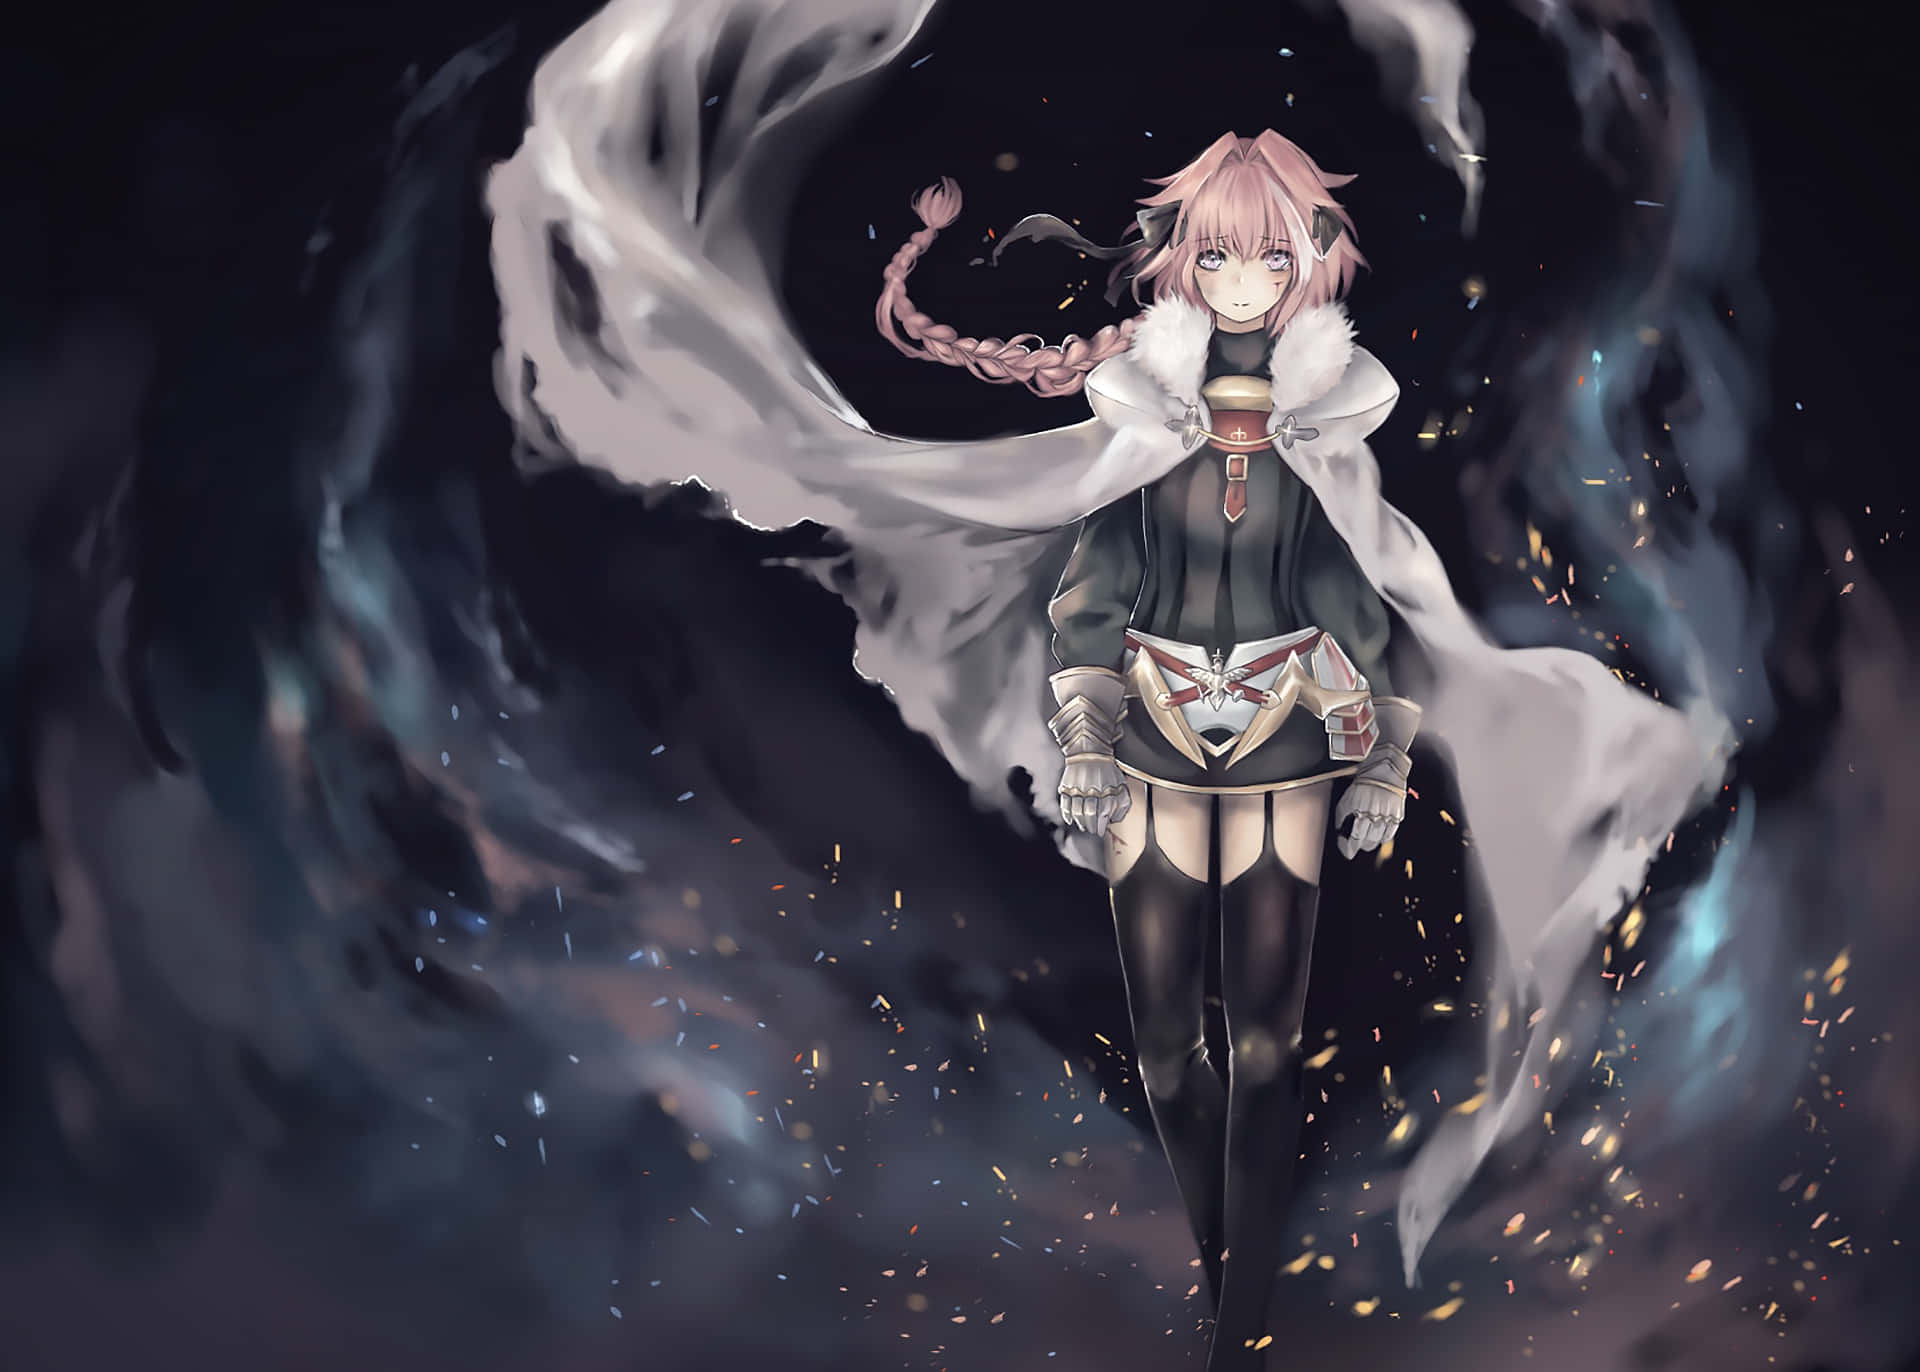 Astolfo, the magical boy from Fate/Apocrypha